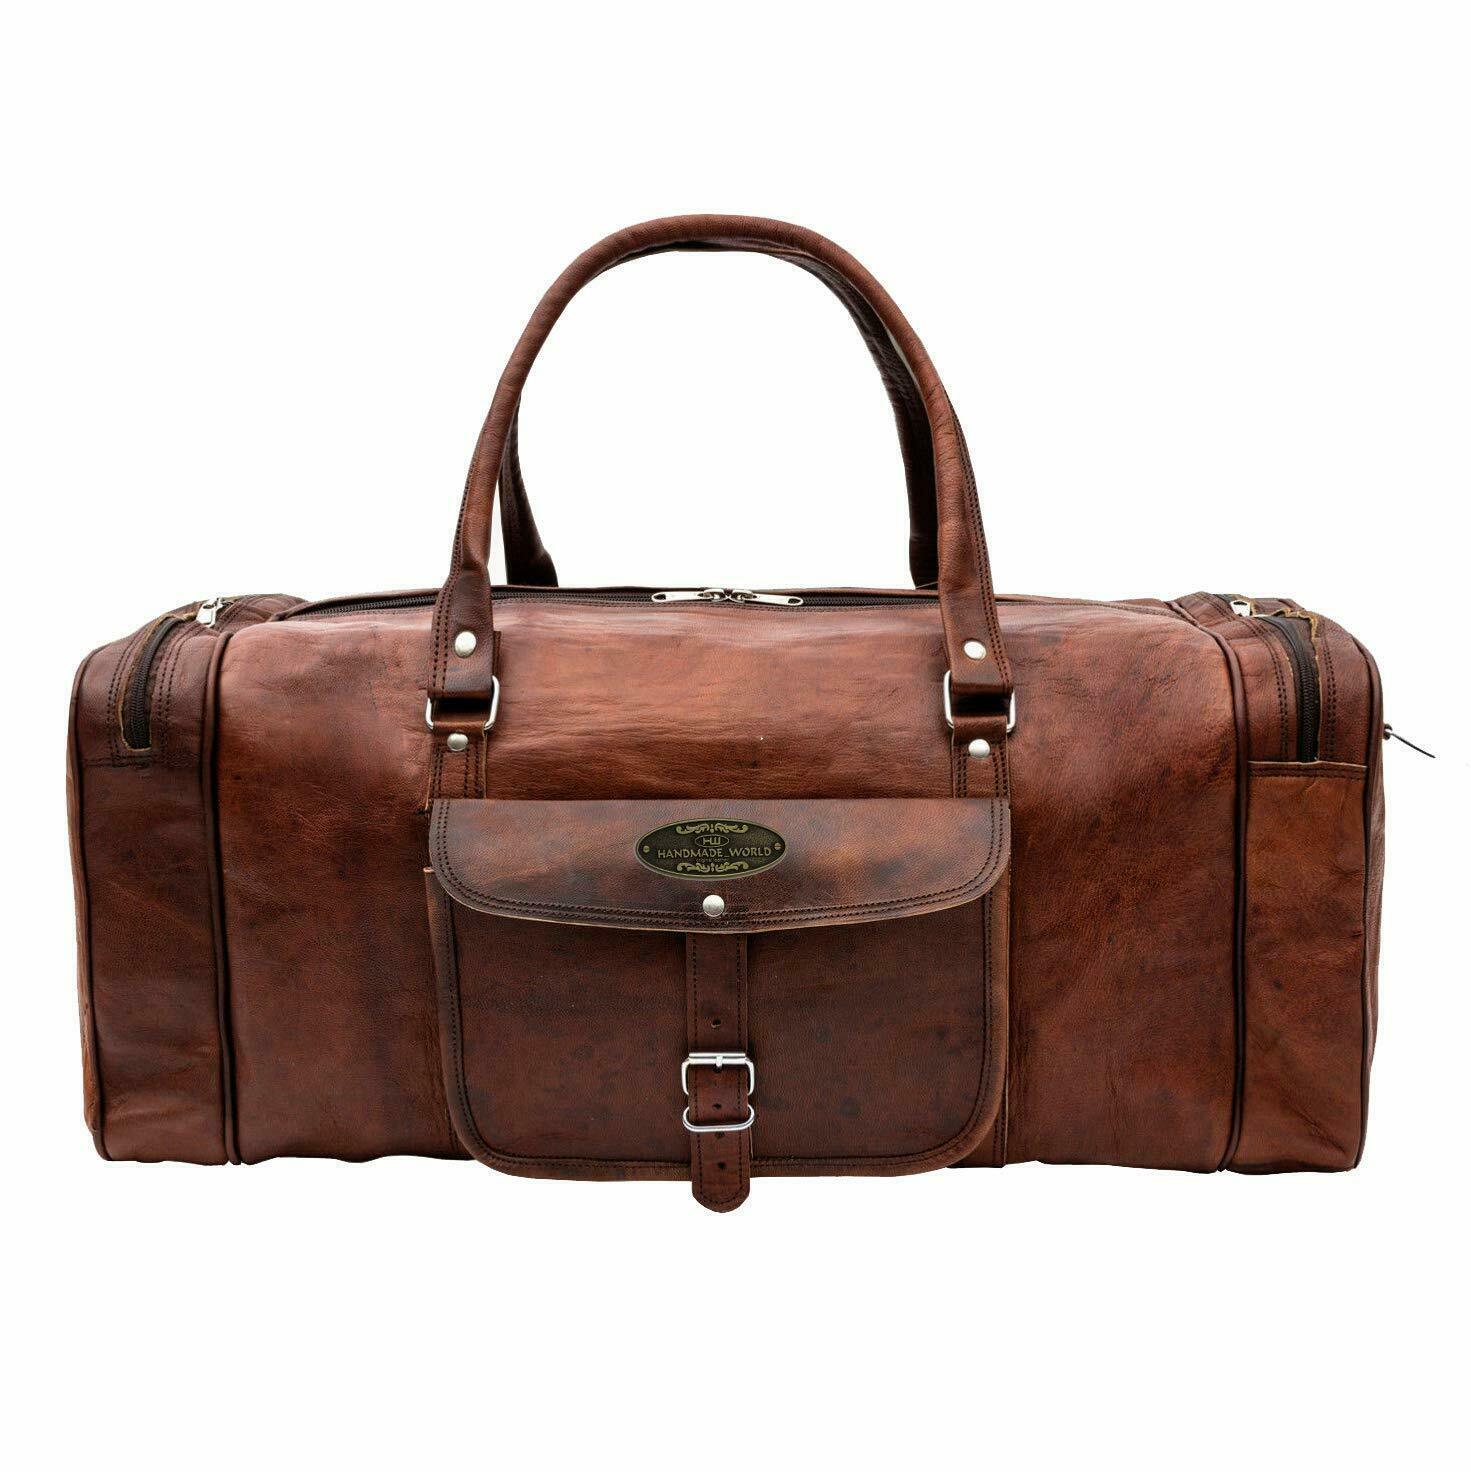 Overnight Carry-on Leather Luggage Bag Brown For Women 24 and 22 Inch ...